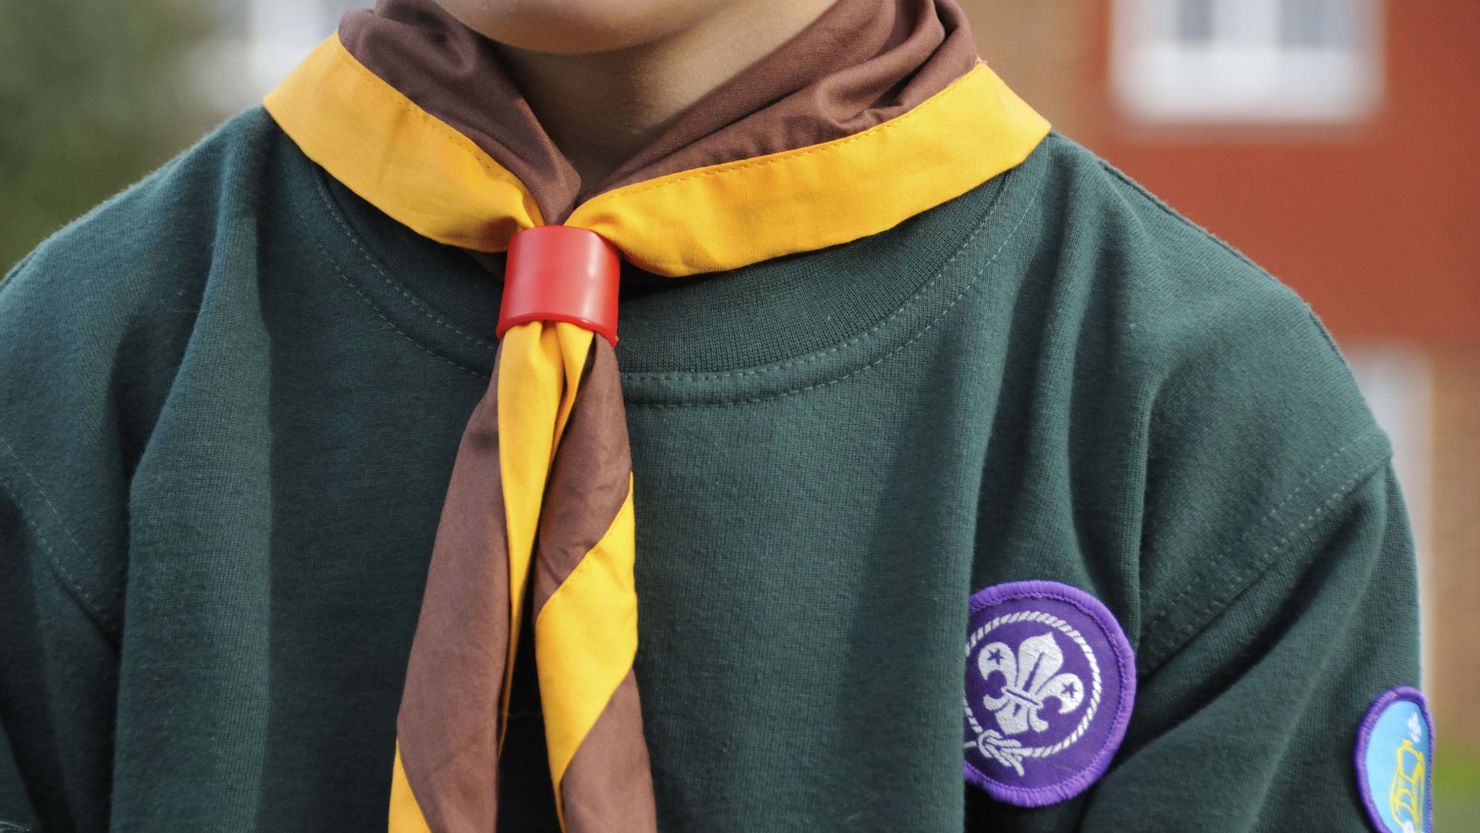 The Scout Association bans members from involvement in politics while in uniform.